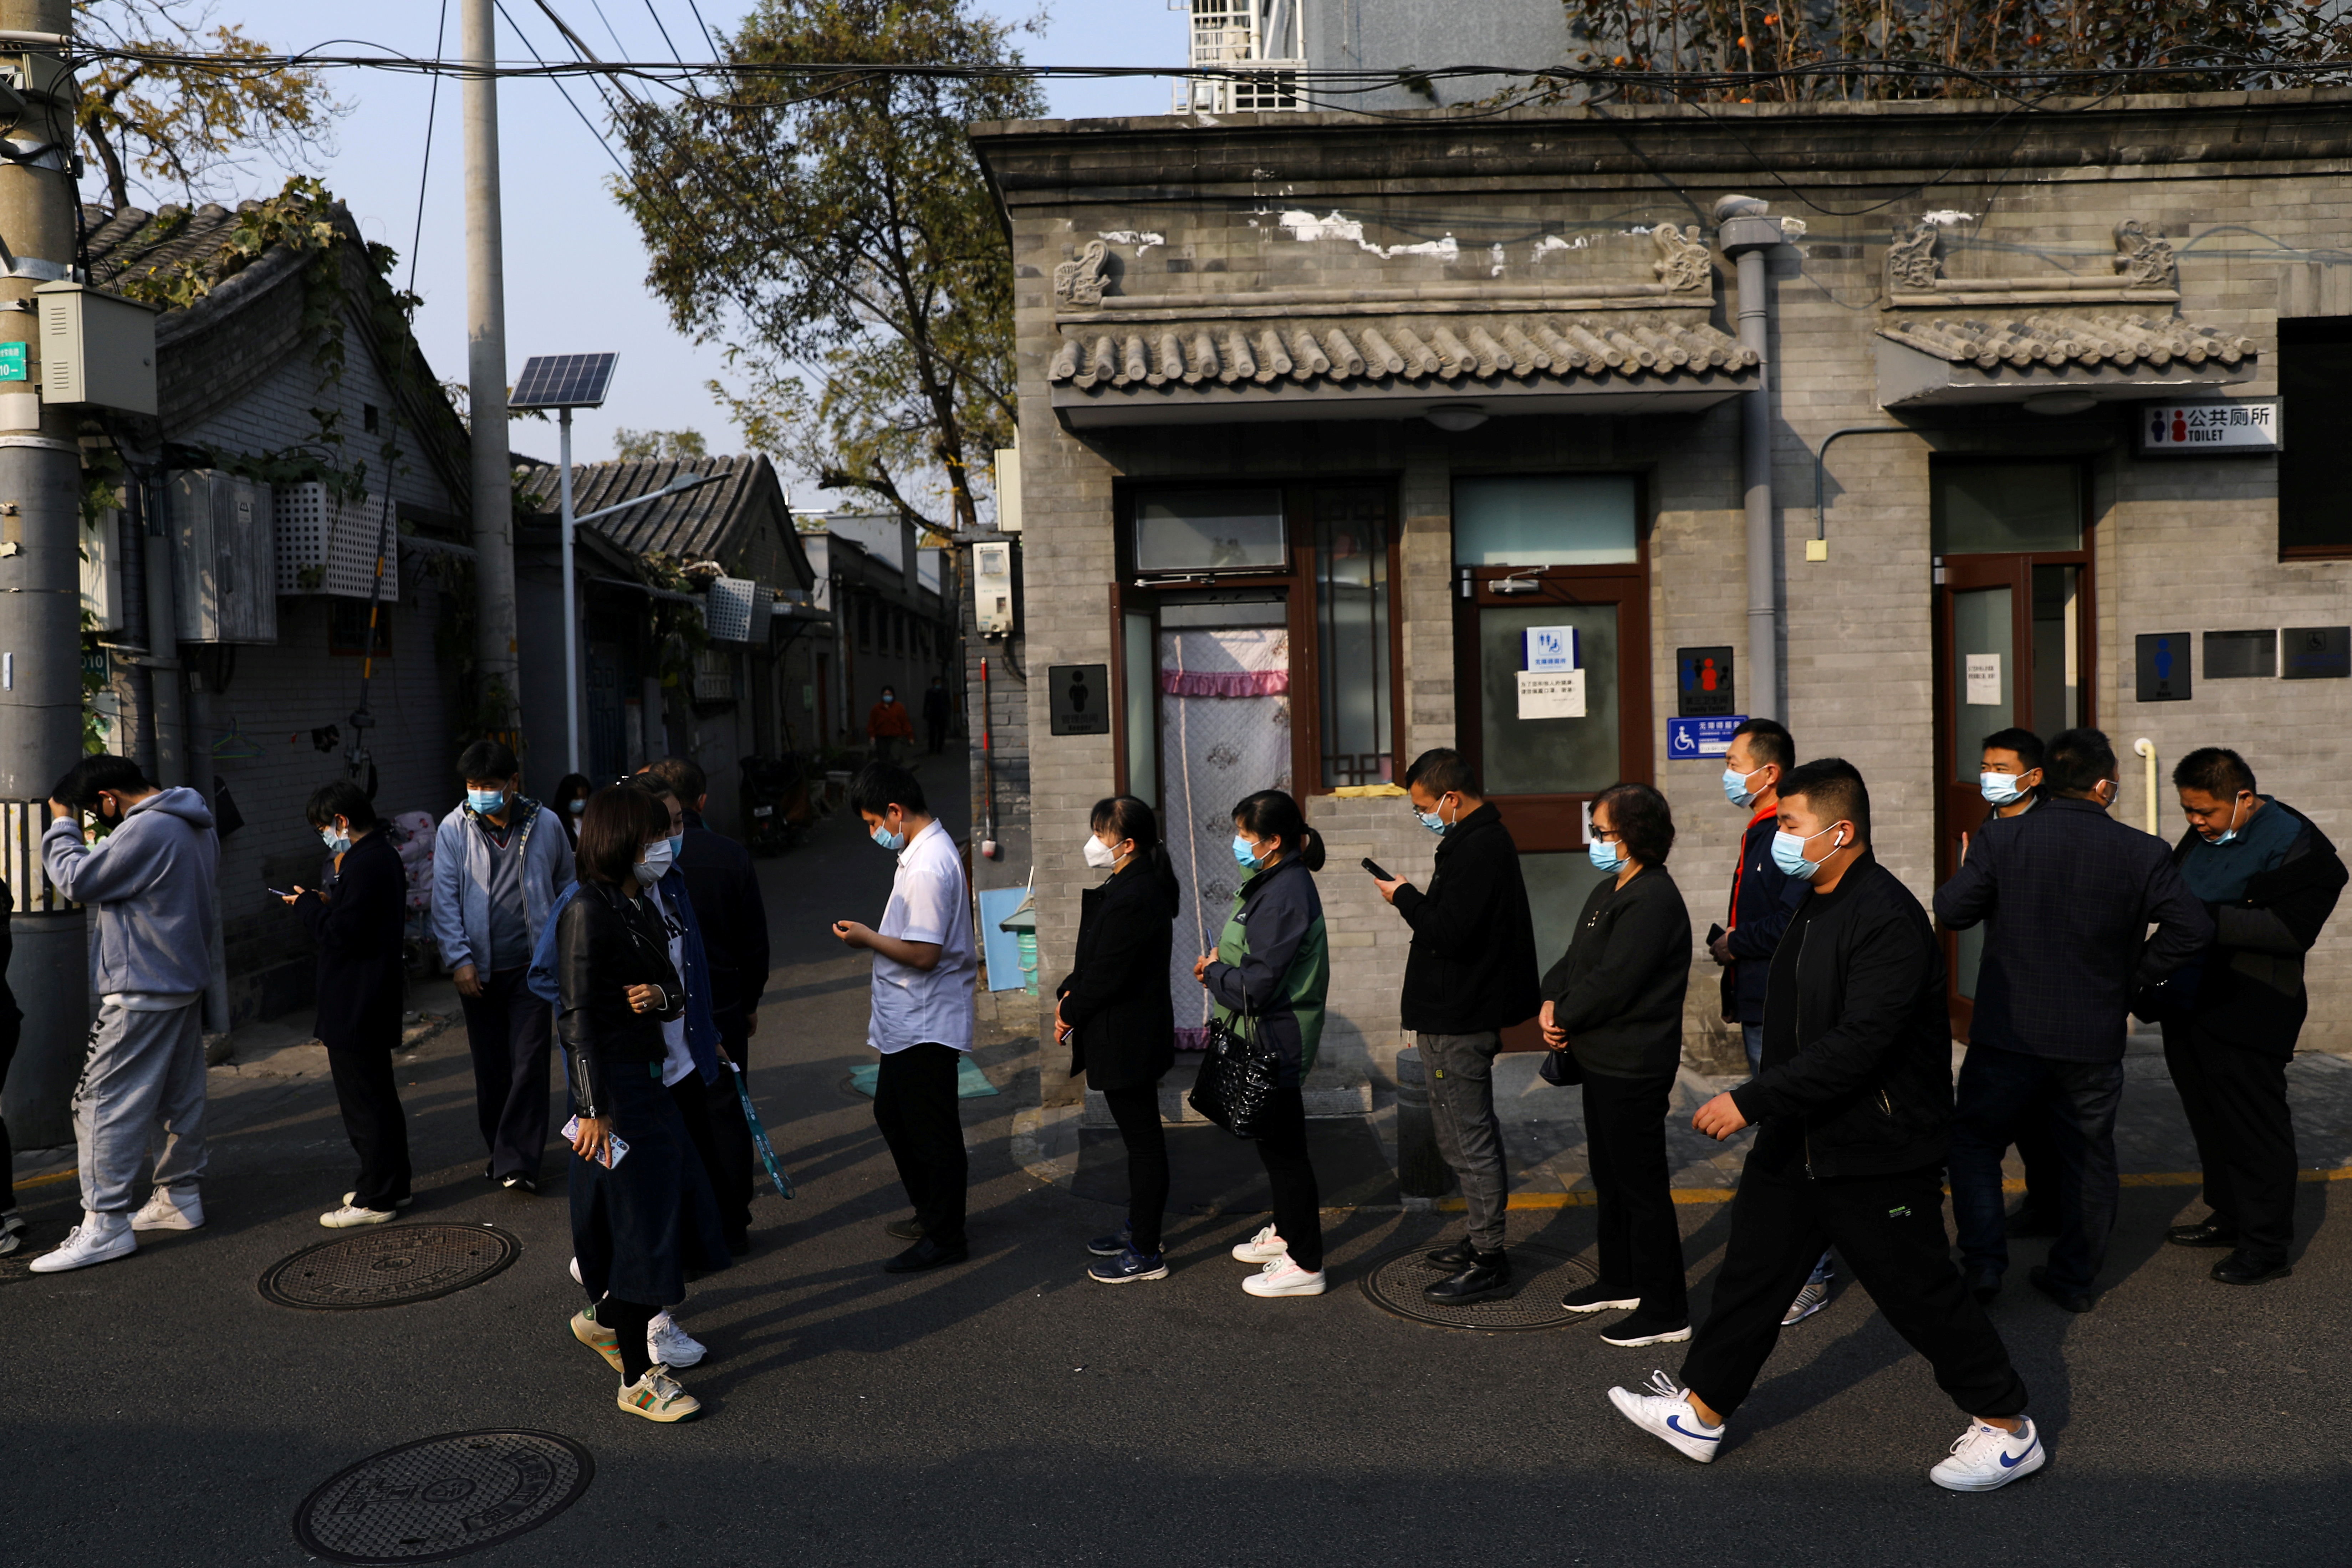 People line up outside a vaccination site after the city started offering booster shots of the vaccine against the coronavirus disease (COVID-19) to vaccinated residents, in Beijing, China October 29, 2021. REUTERS/Tingshu Wang/File Photo